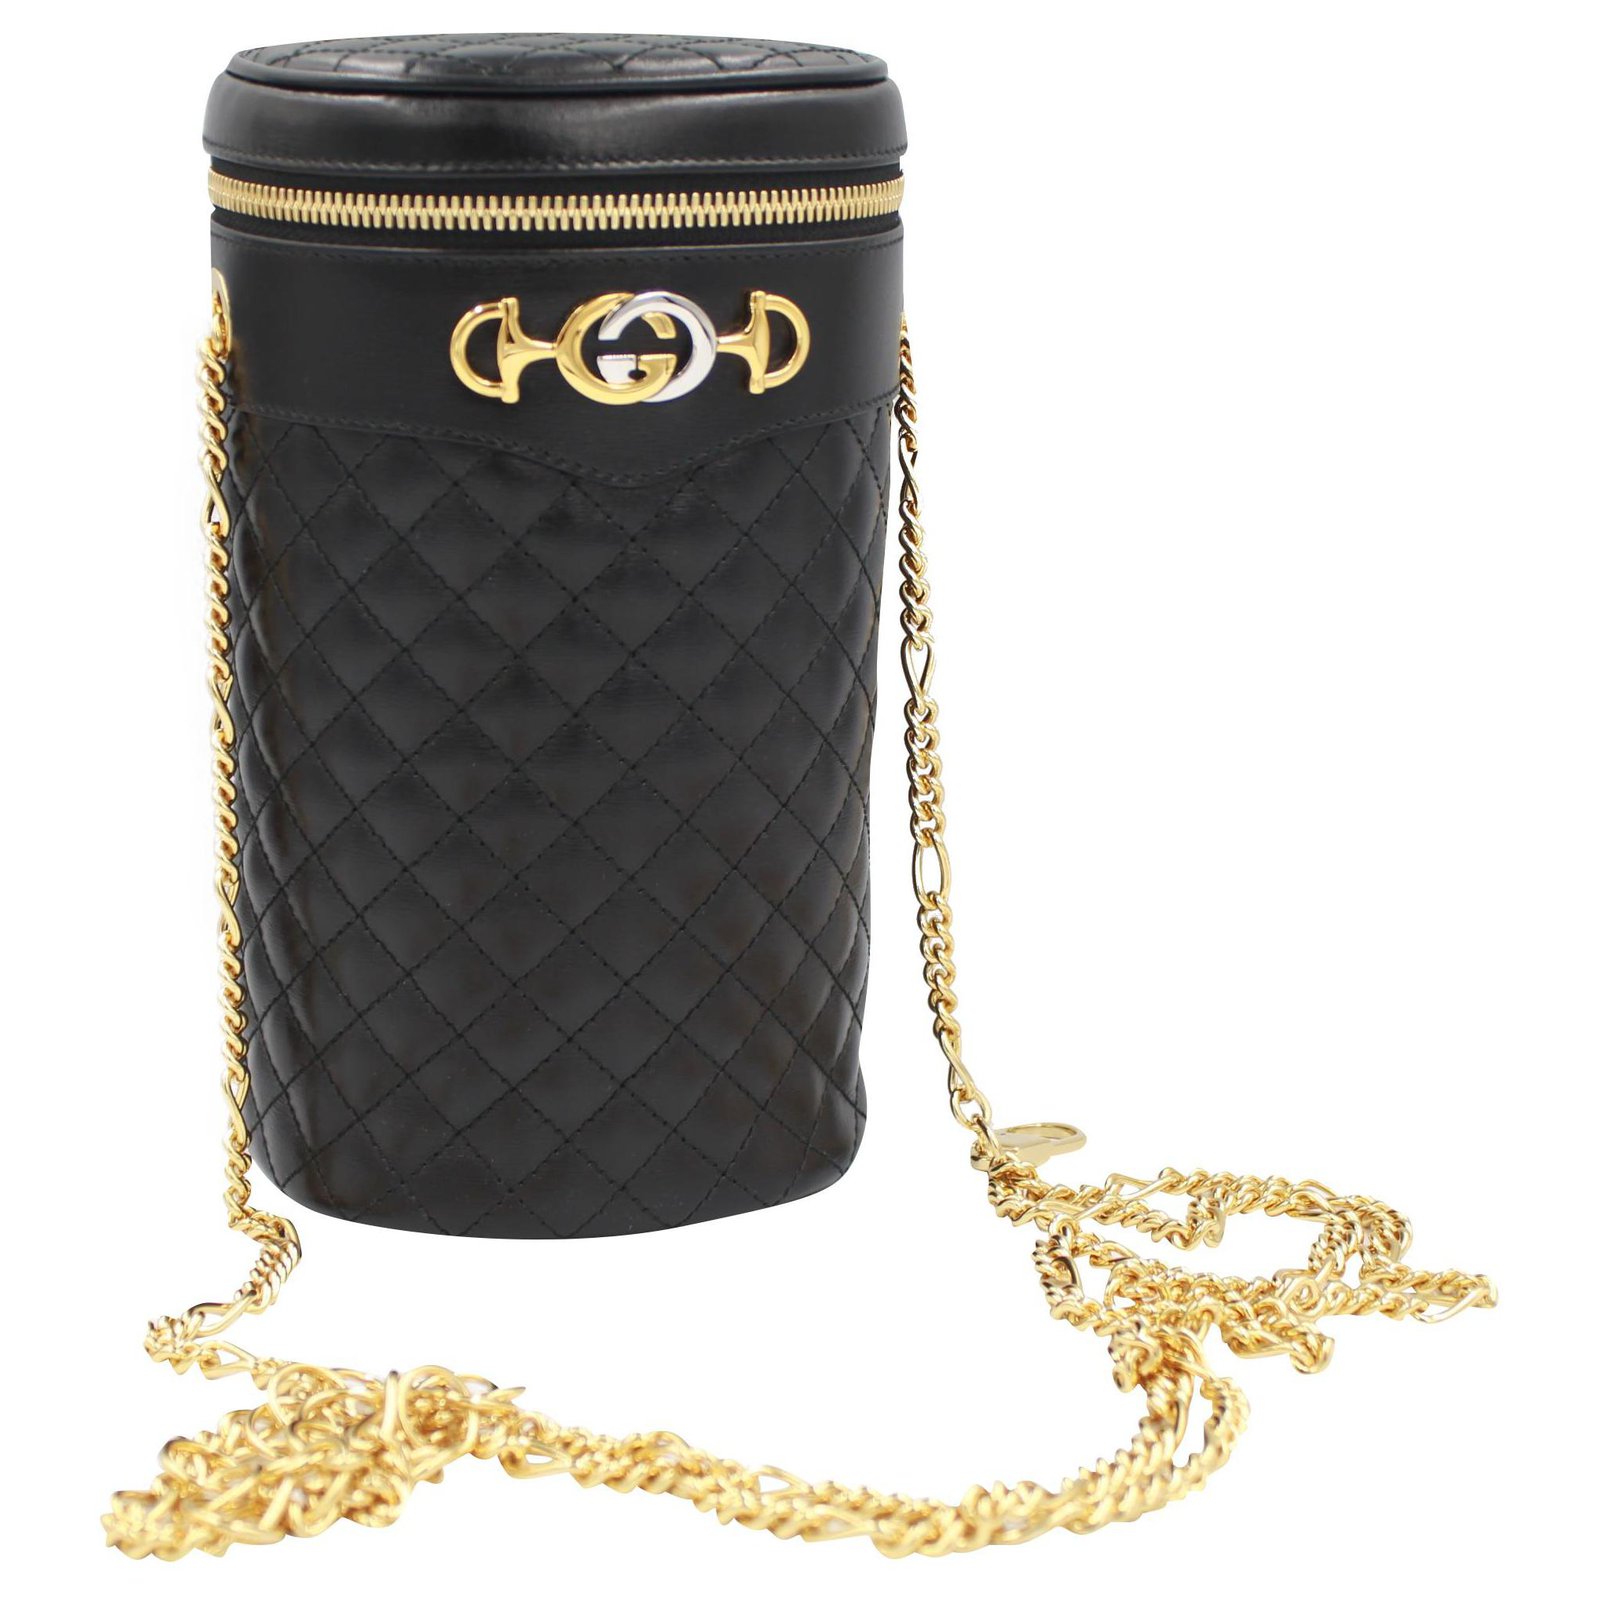 black leather gucci bag gold chain